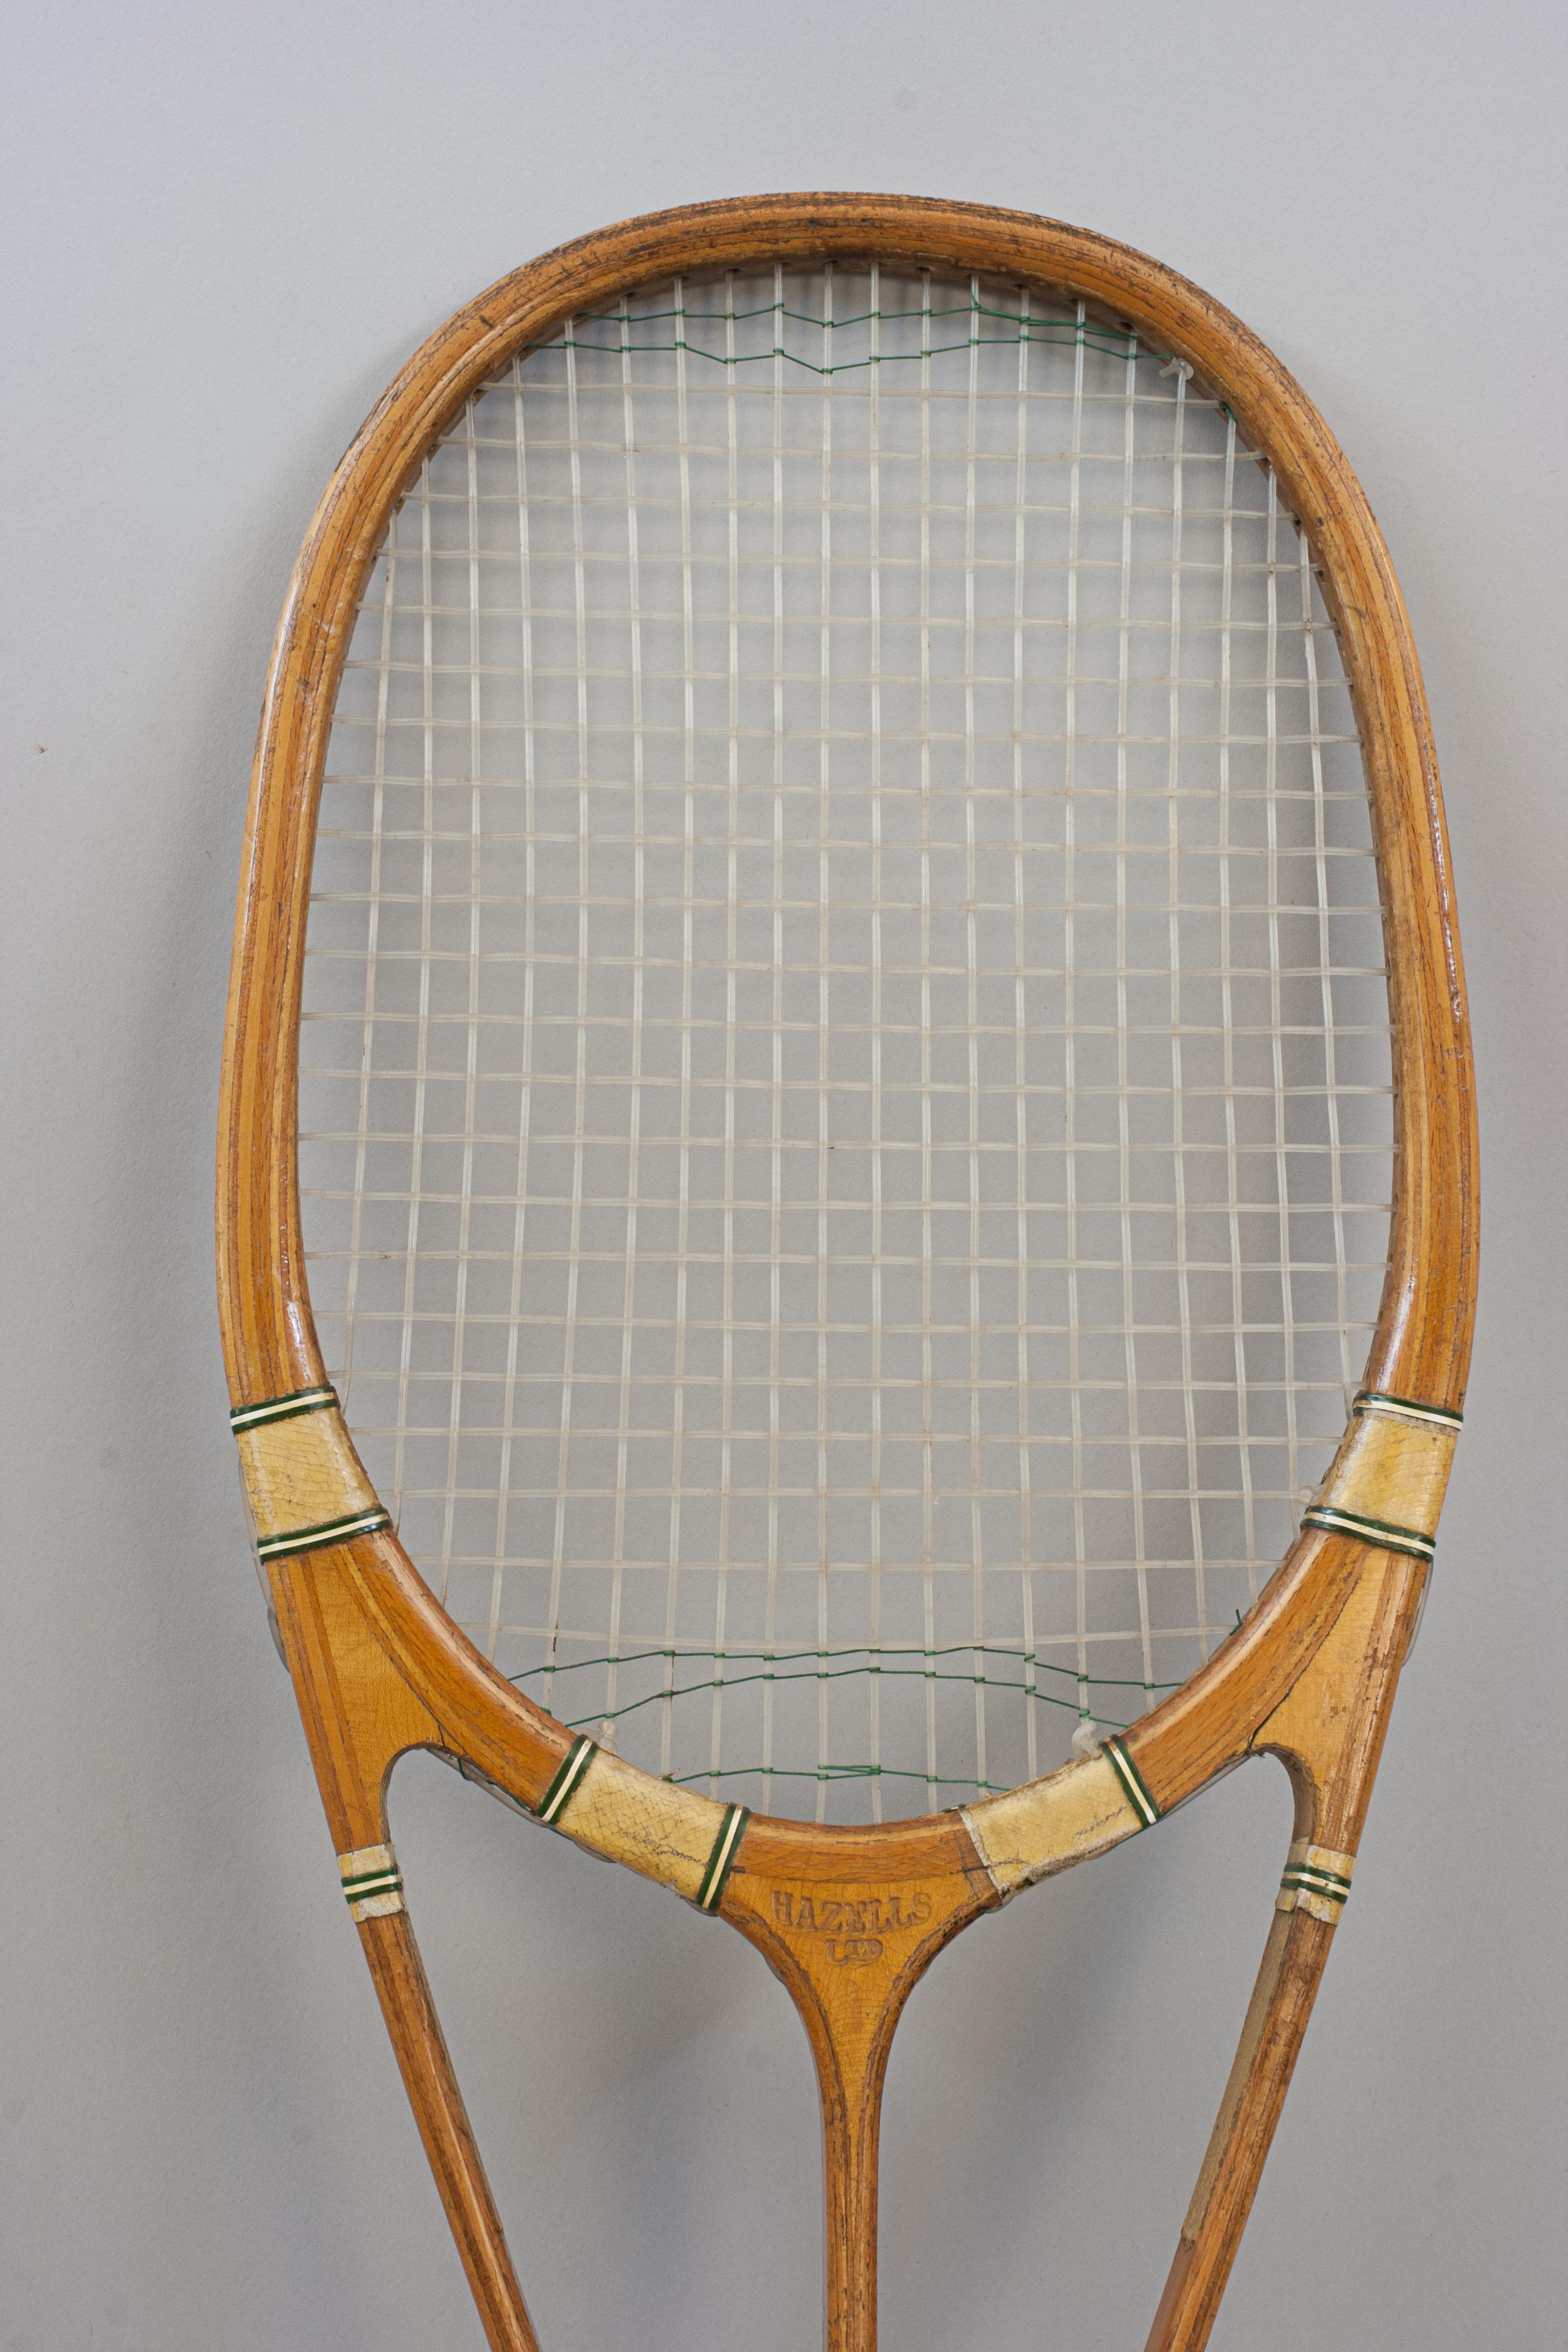 Vintage Hazell Streamline Green Star Tennis Racket In Good Condition For Sale In Oxfordshire, GB